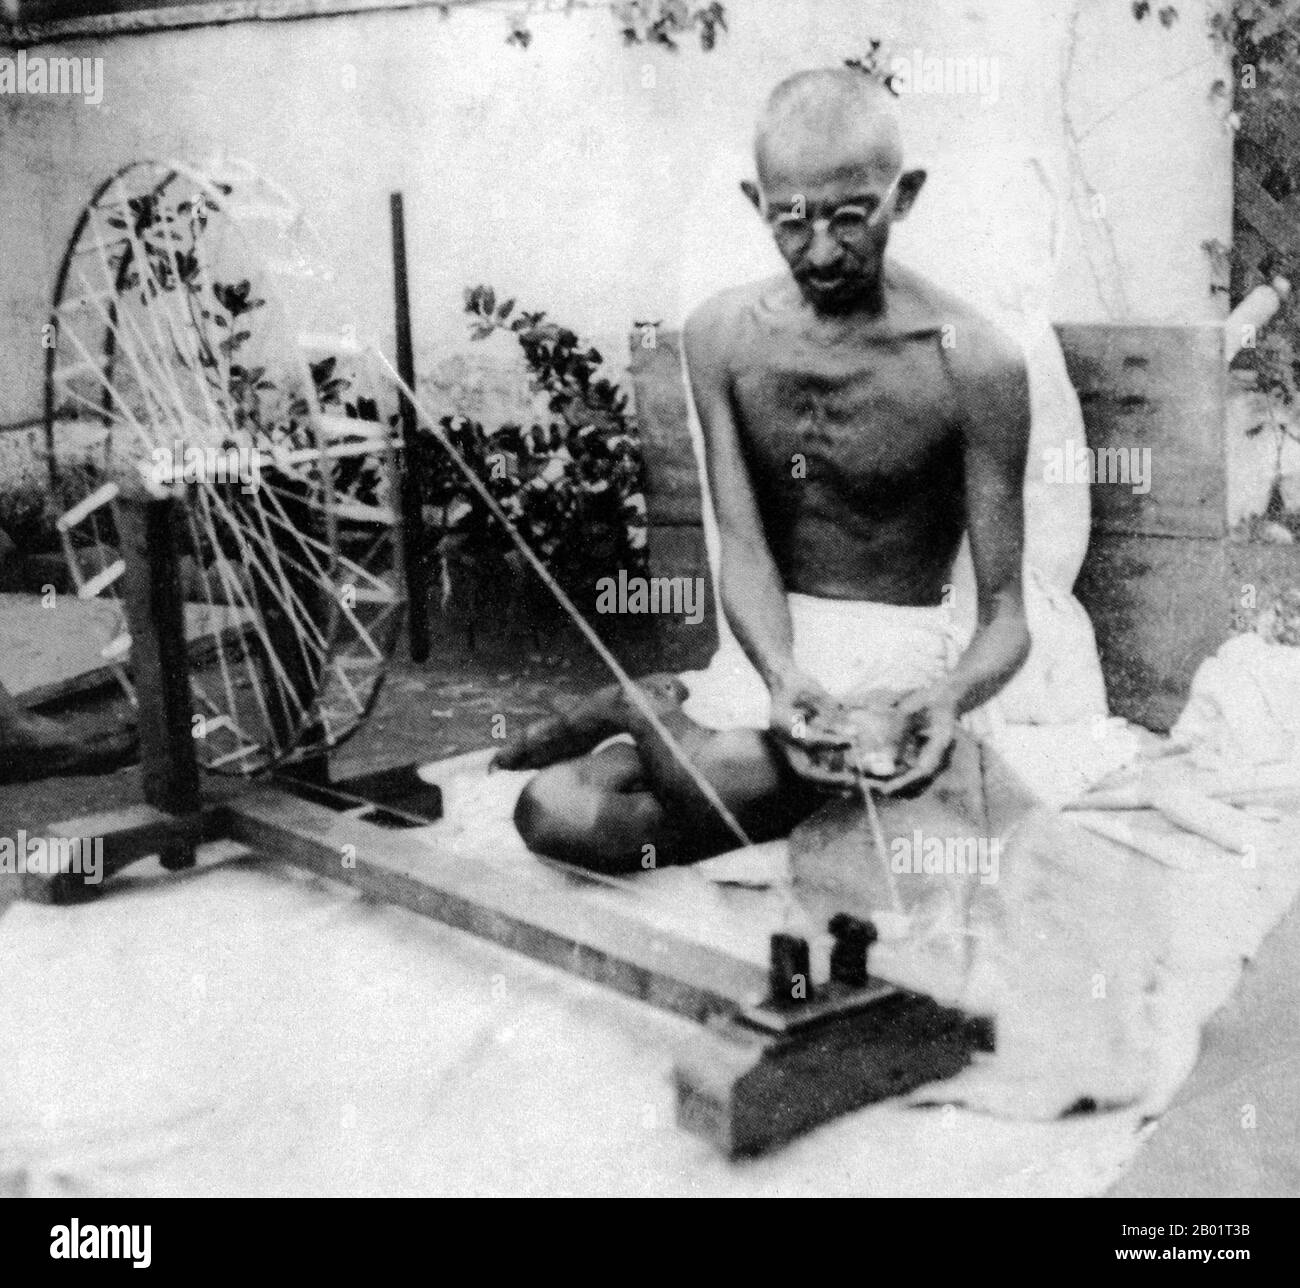 India: Mahatma Gandhi (2 October 1869 - 30 January 1948), preeminent political and ideological leader of India's independence movement, c. 1940.  Mohandas Karamchand Gandhi was the preeminent political and ideological leader of India during the Indian independence movement. He pioneered satyagraha. This is defined as resistance to tyranny through mass civil disobedience, a philosophy firmly founded upon ahimsa, or total non-violence. This concept helped India gain independence and inspired movements for civil rights and freedom across the world. Stock Photo